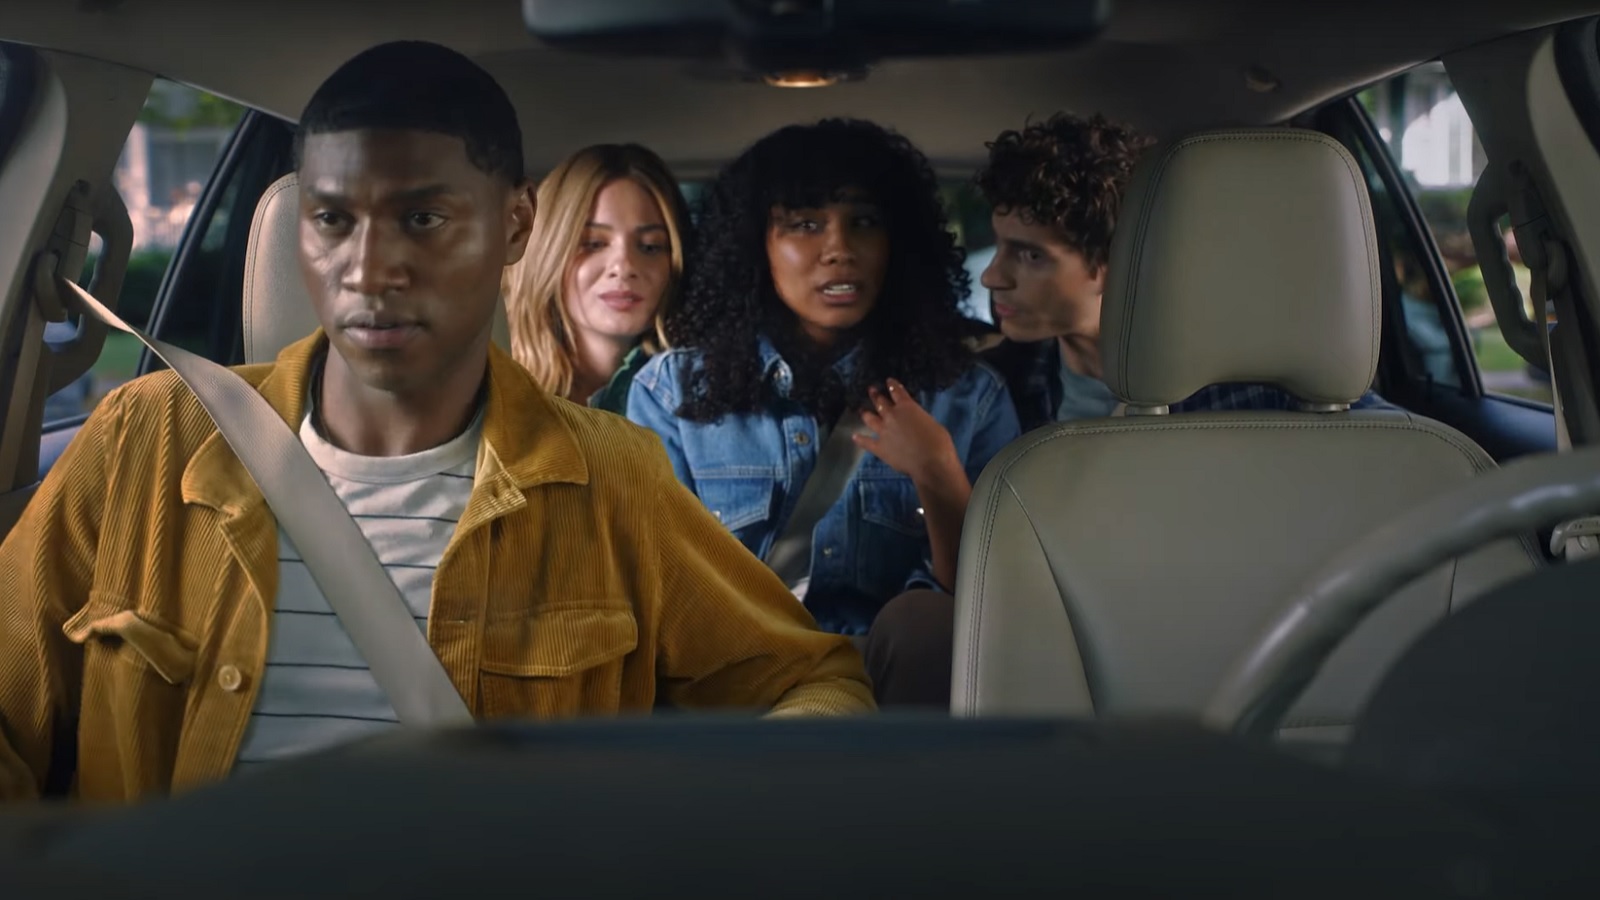 PSAs Ask Consumers to Reflect on the Risks of a Marijuana-Driving Combination